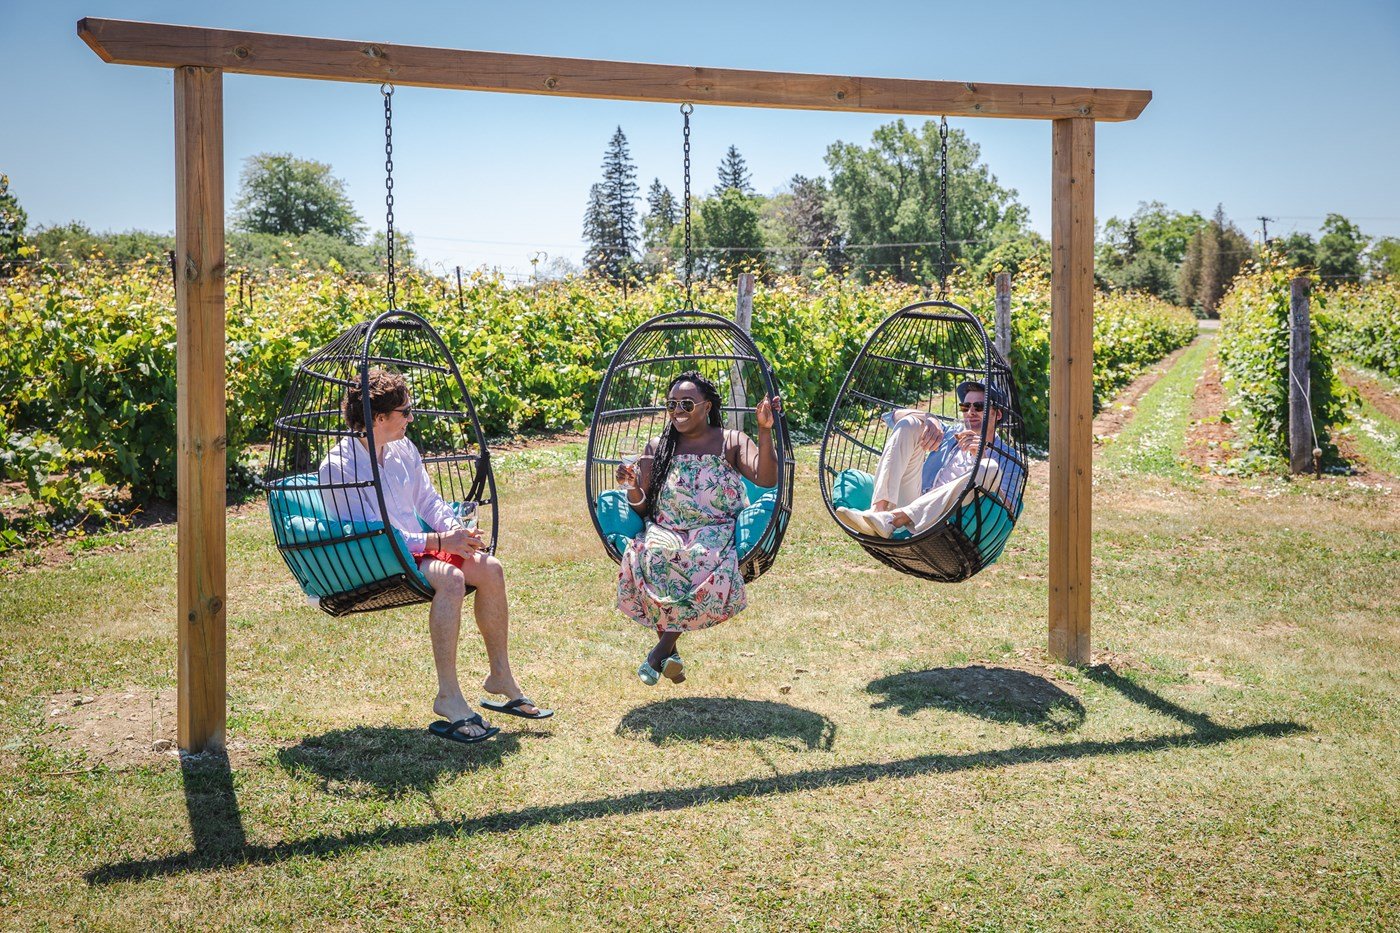 Friends enjoying a glass of Sandbanks wine while sitting in egg chairs at the Sandbanks Winery.